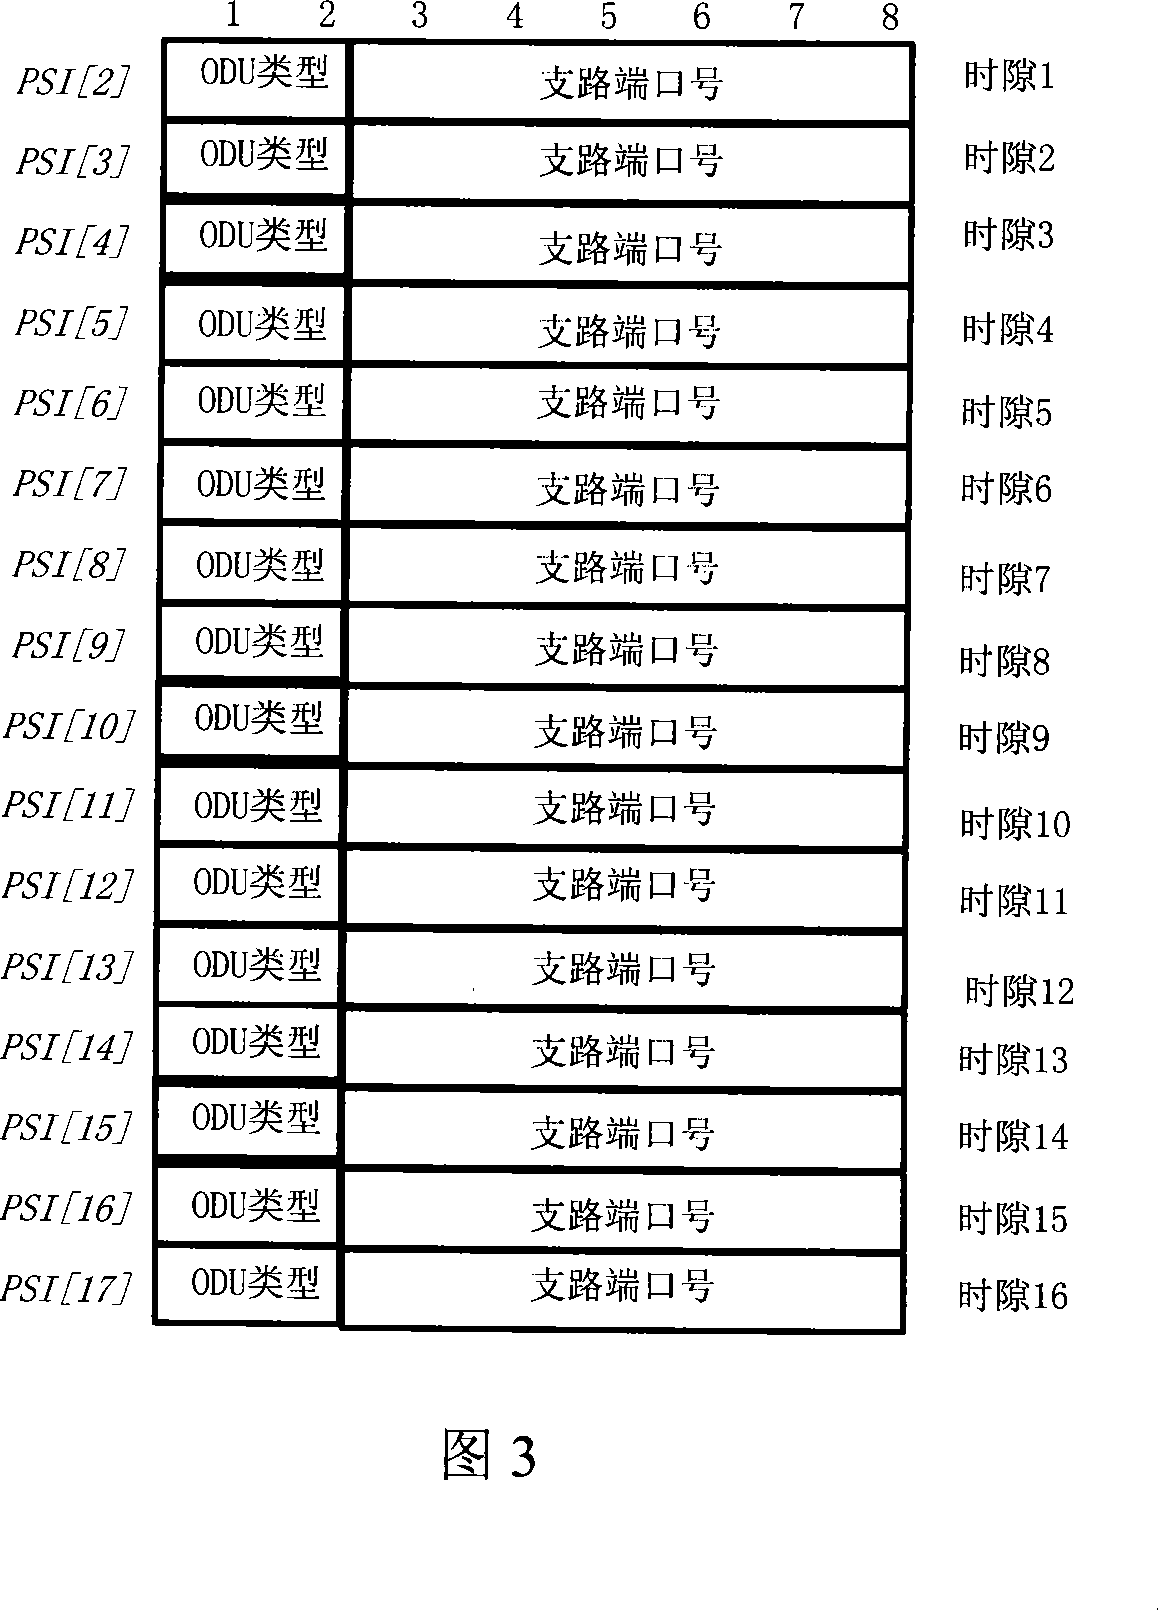 Method for time slot partition and overhead processing of optical payload unit in light transmission network